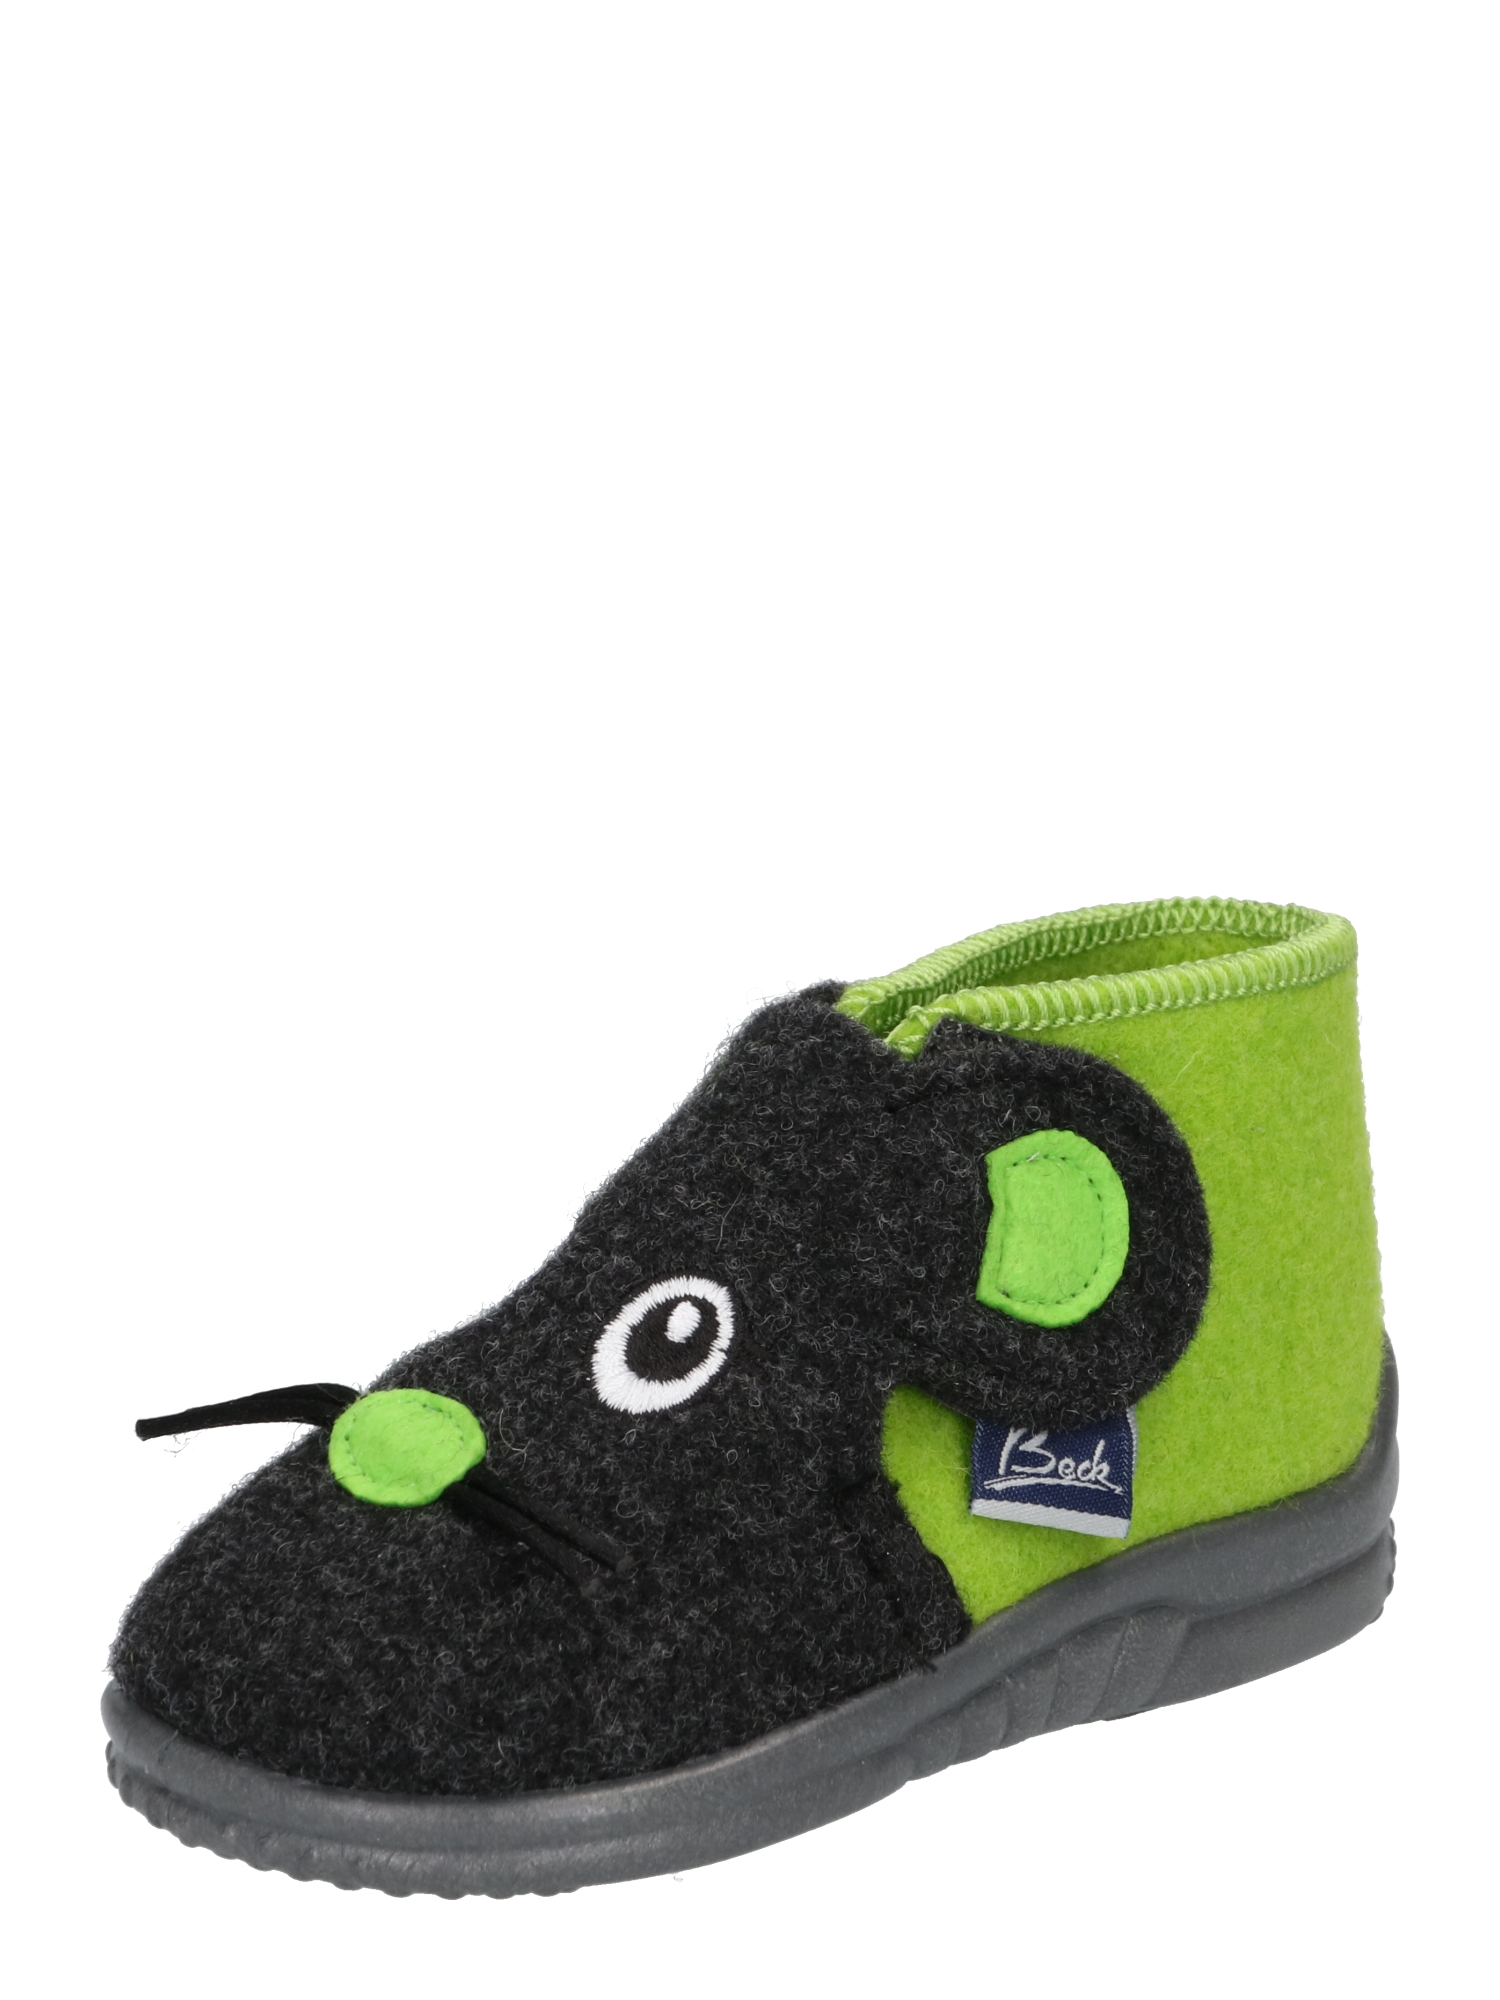 QRb53 Bambini BECK Ciabatta Maus in Grigio, Lime 